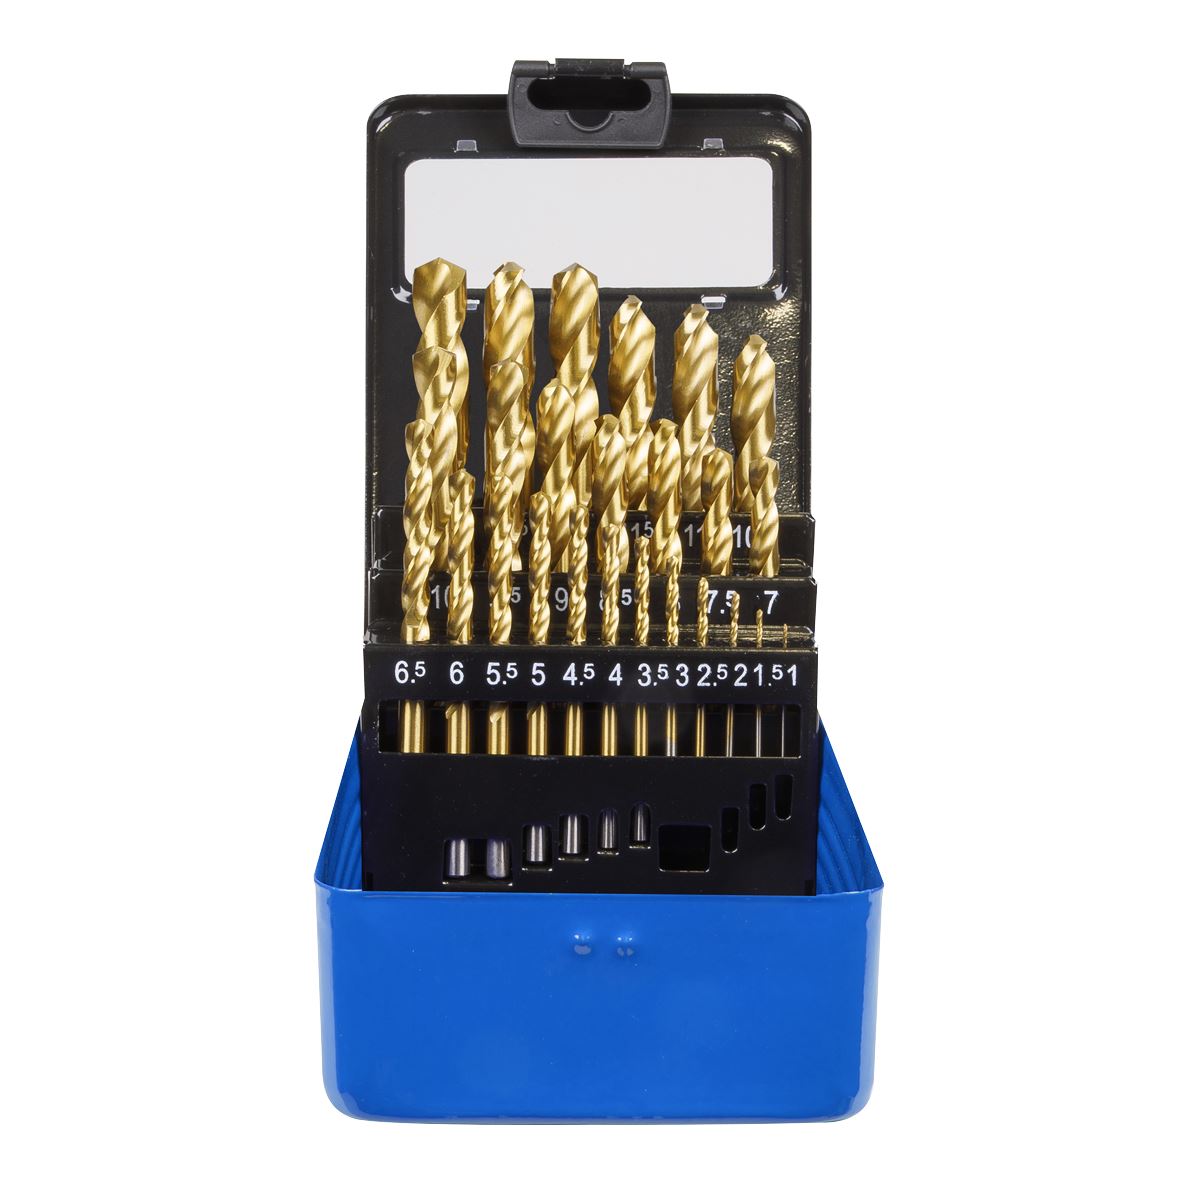 Sealey 25 Piece HSS Fully Ground Drill Bit Set 1-13mm DIN 338 Stainless Steel Copper